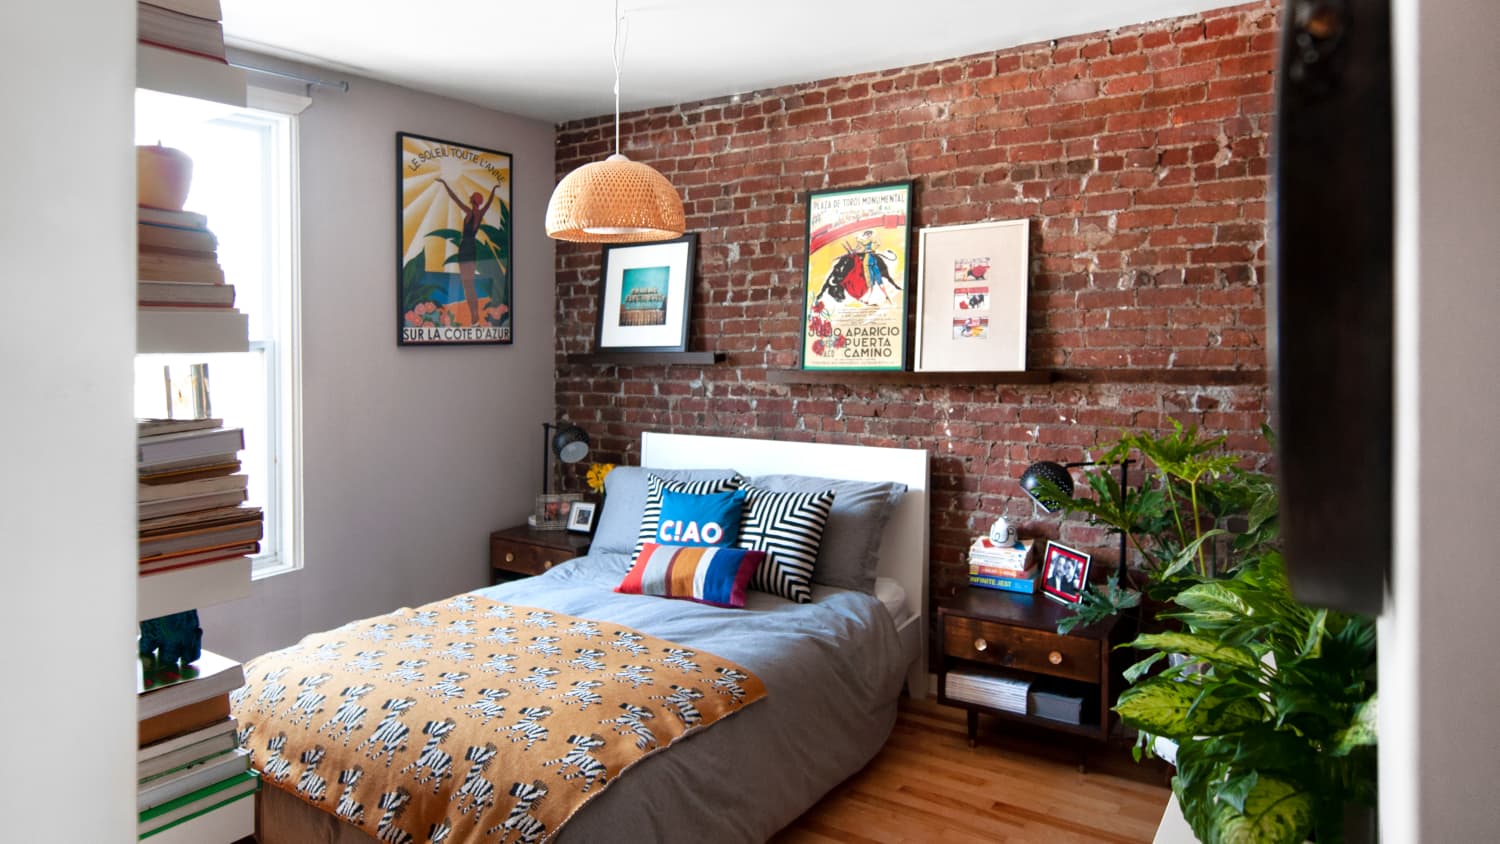 14 Stunning Brick Wall Bedrooms to Inspire Your Sleep Space